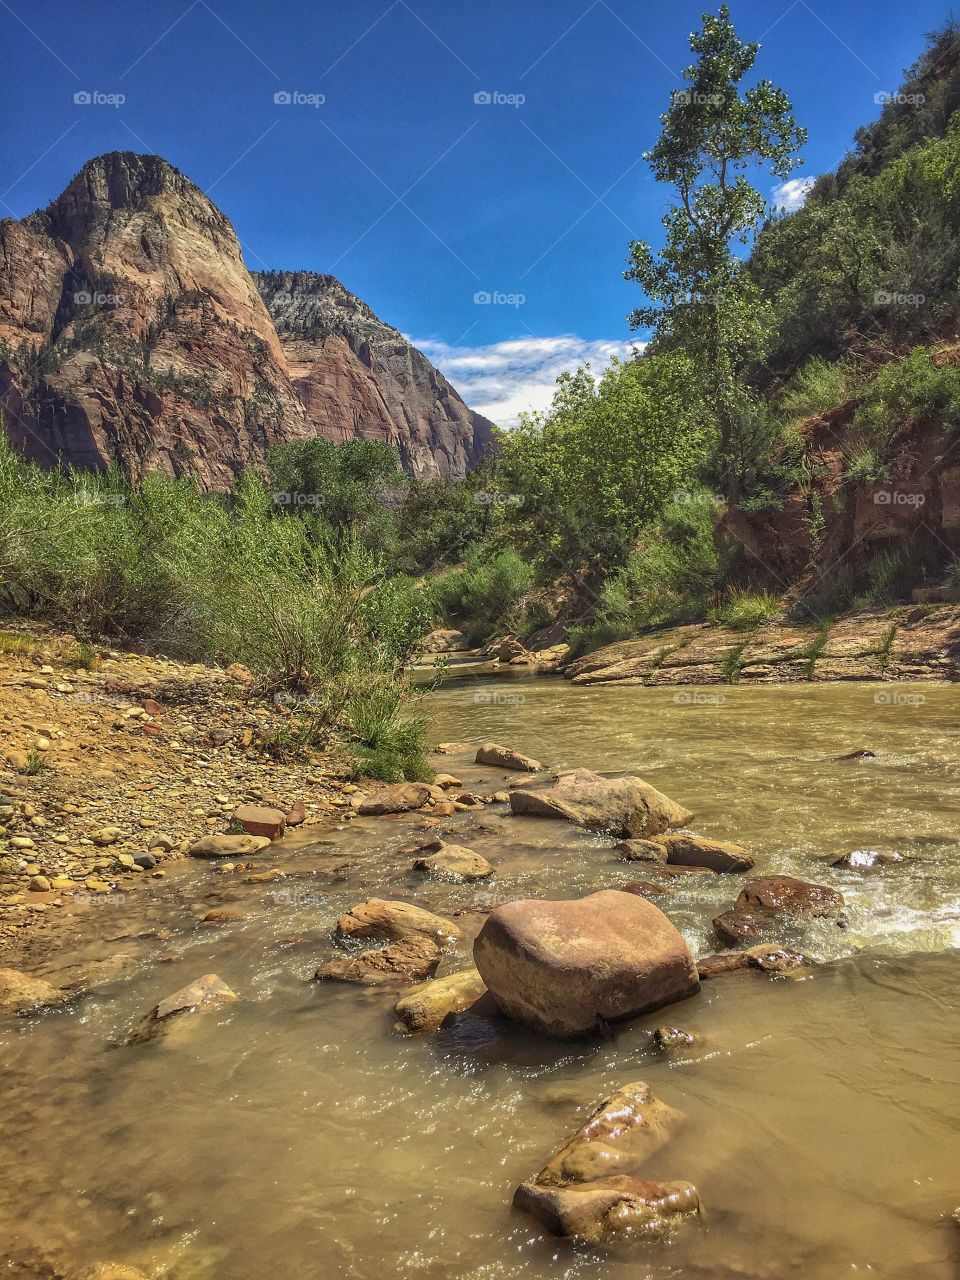 River in Zion